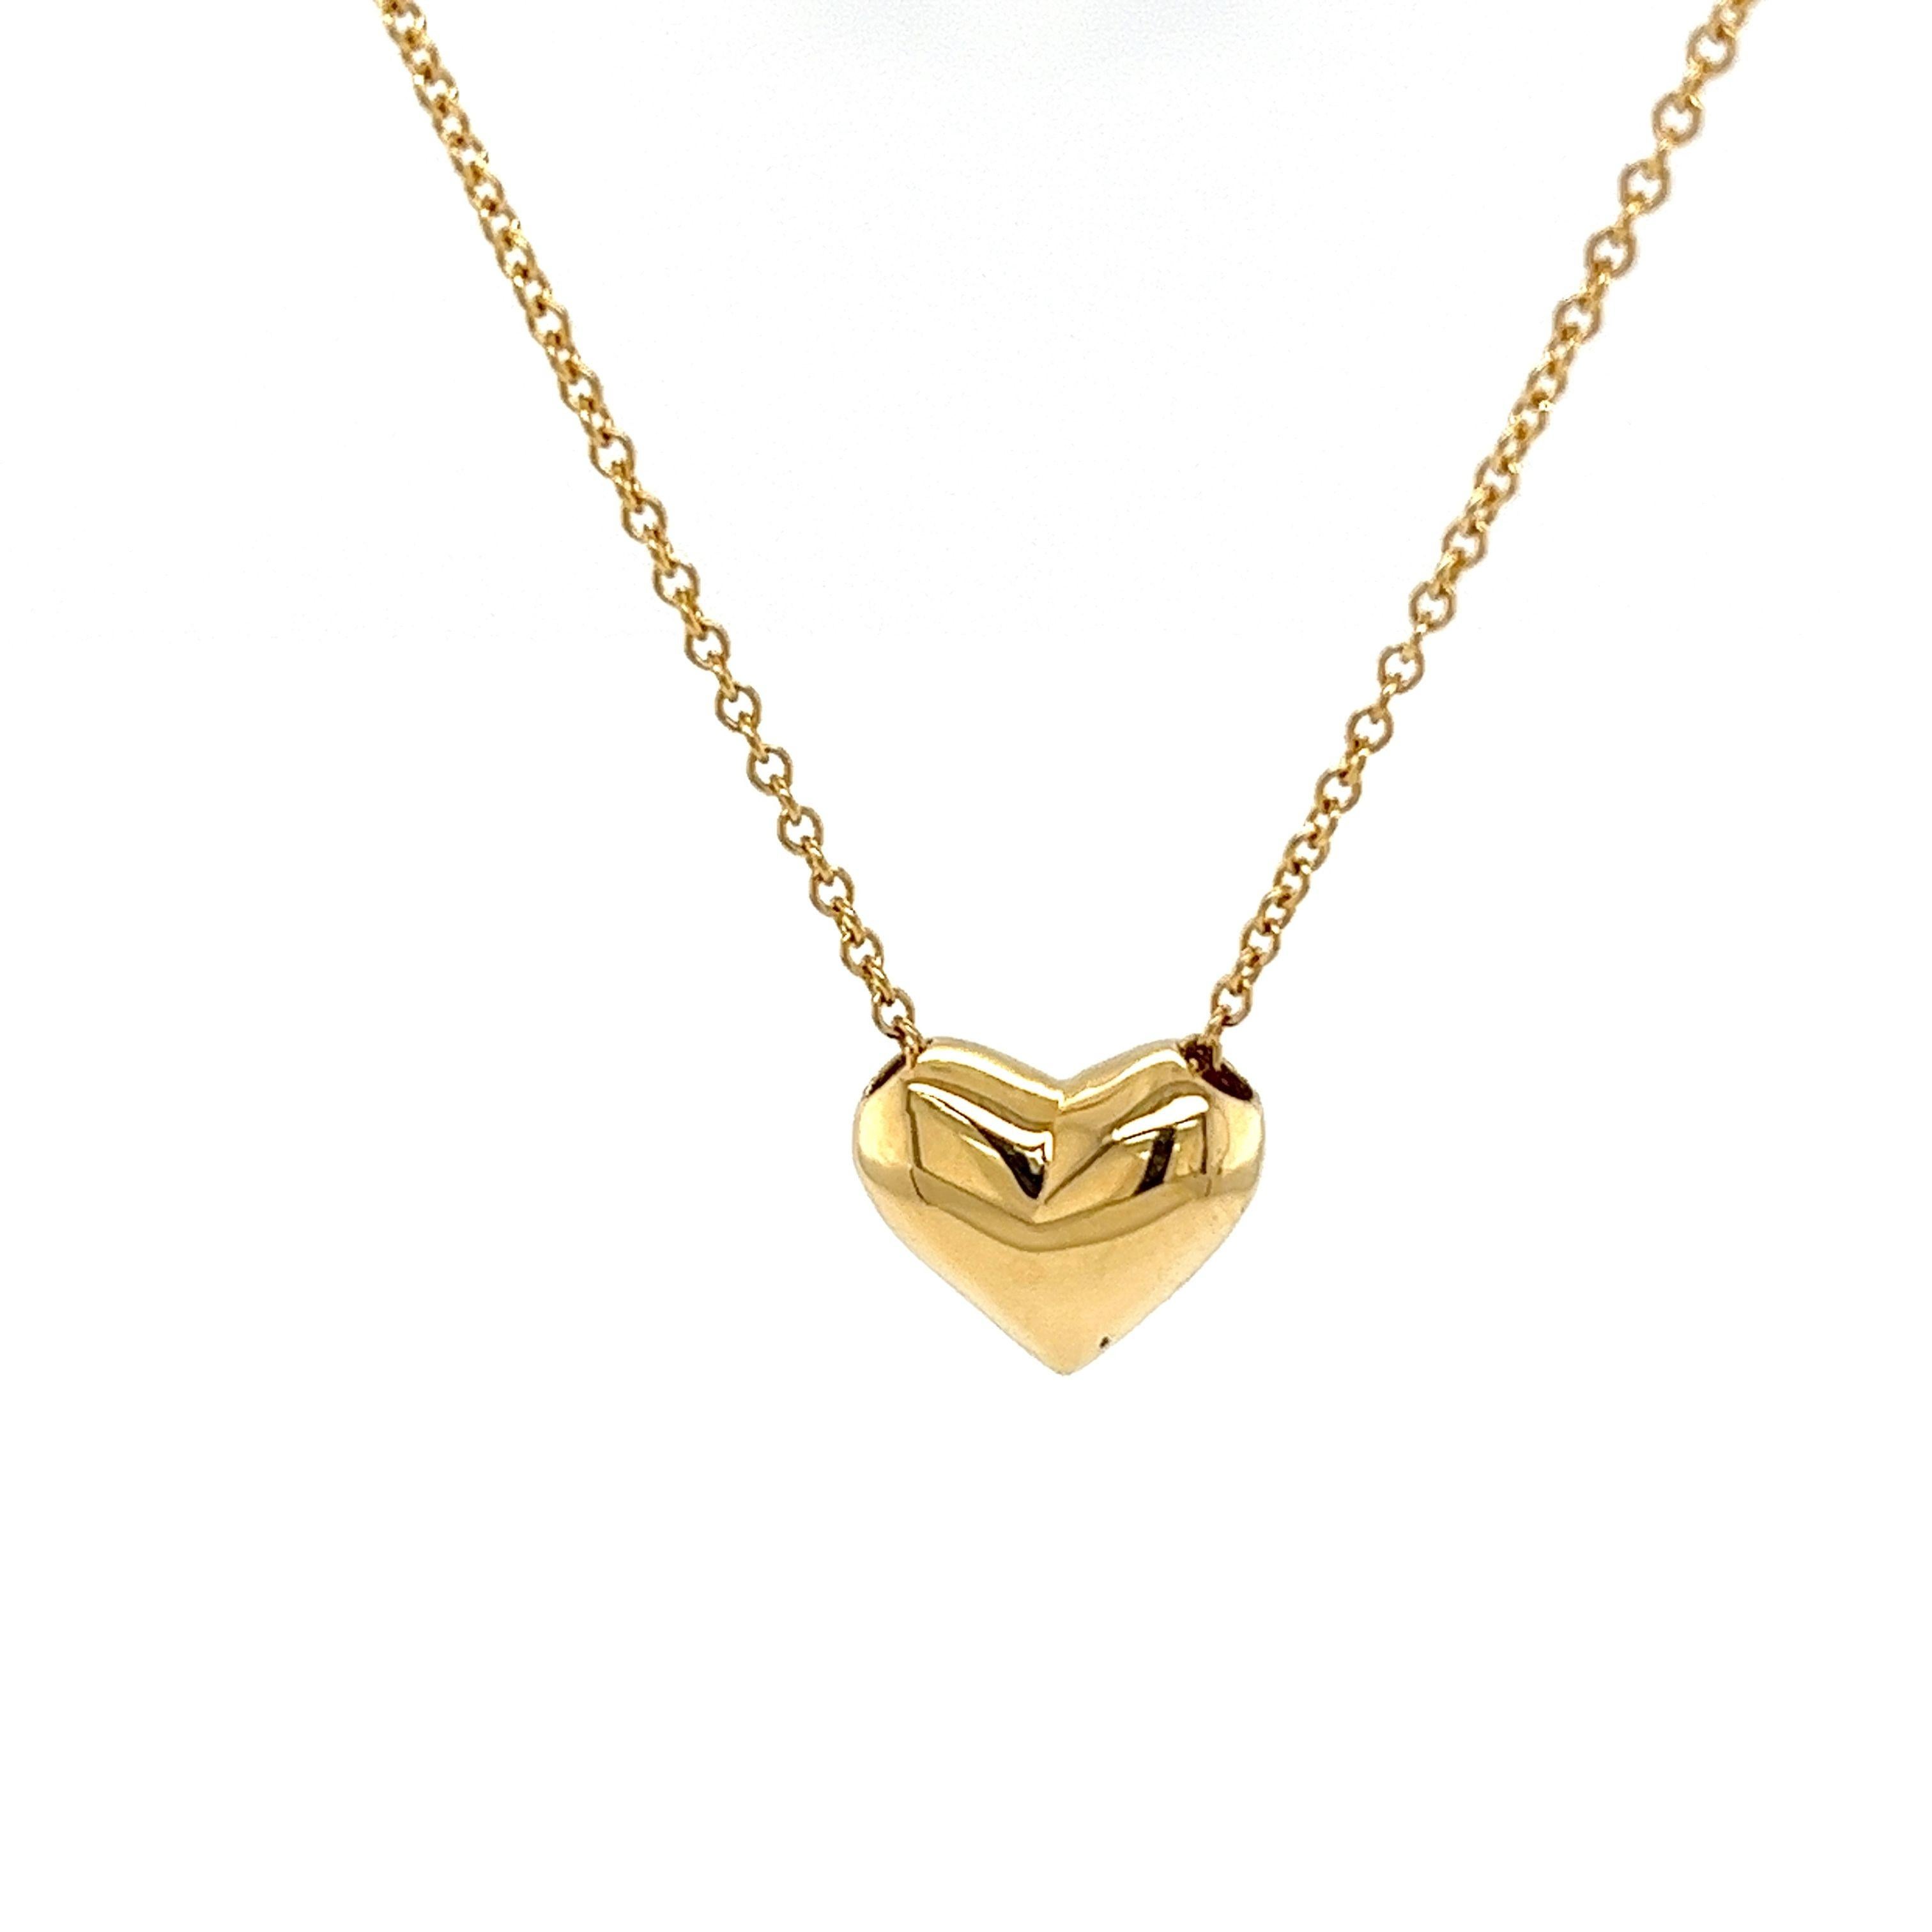 Tiffany & Co. Etoile Diamond Heart Necklace in 18ct Yellow Gold For Sale 3